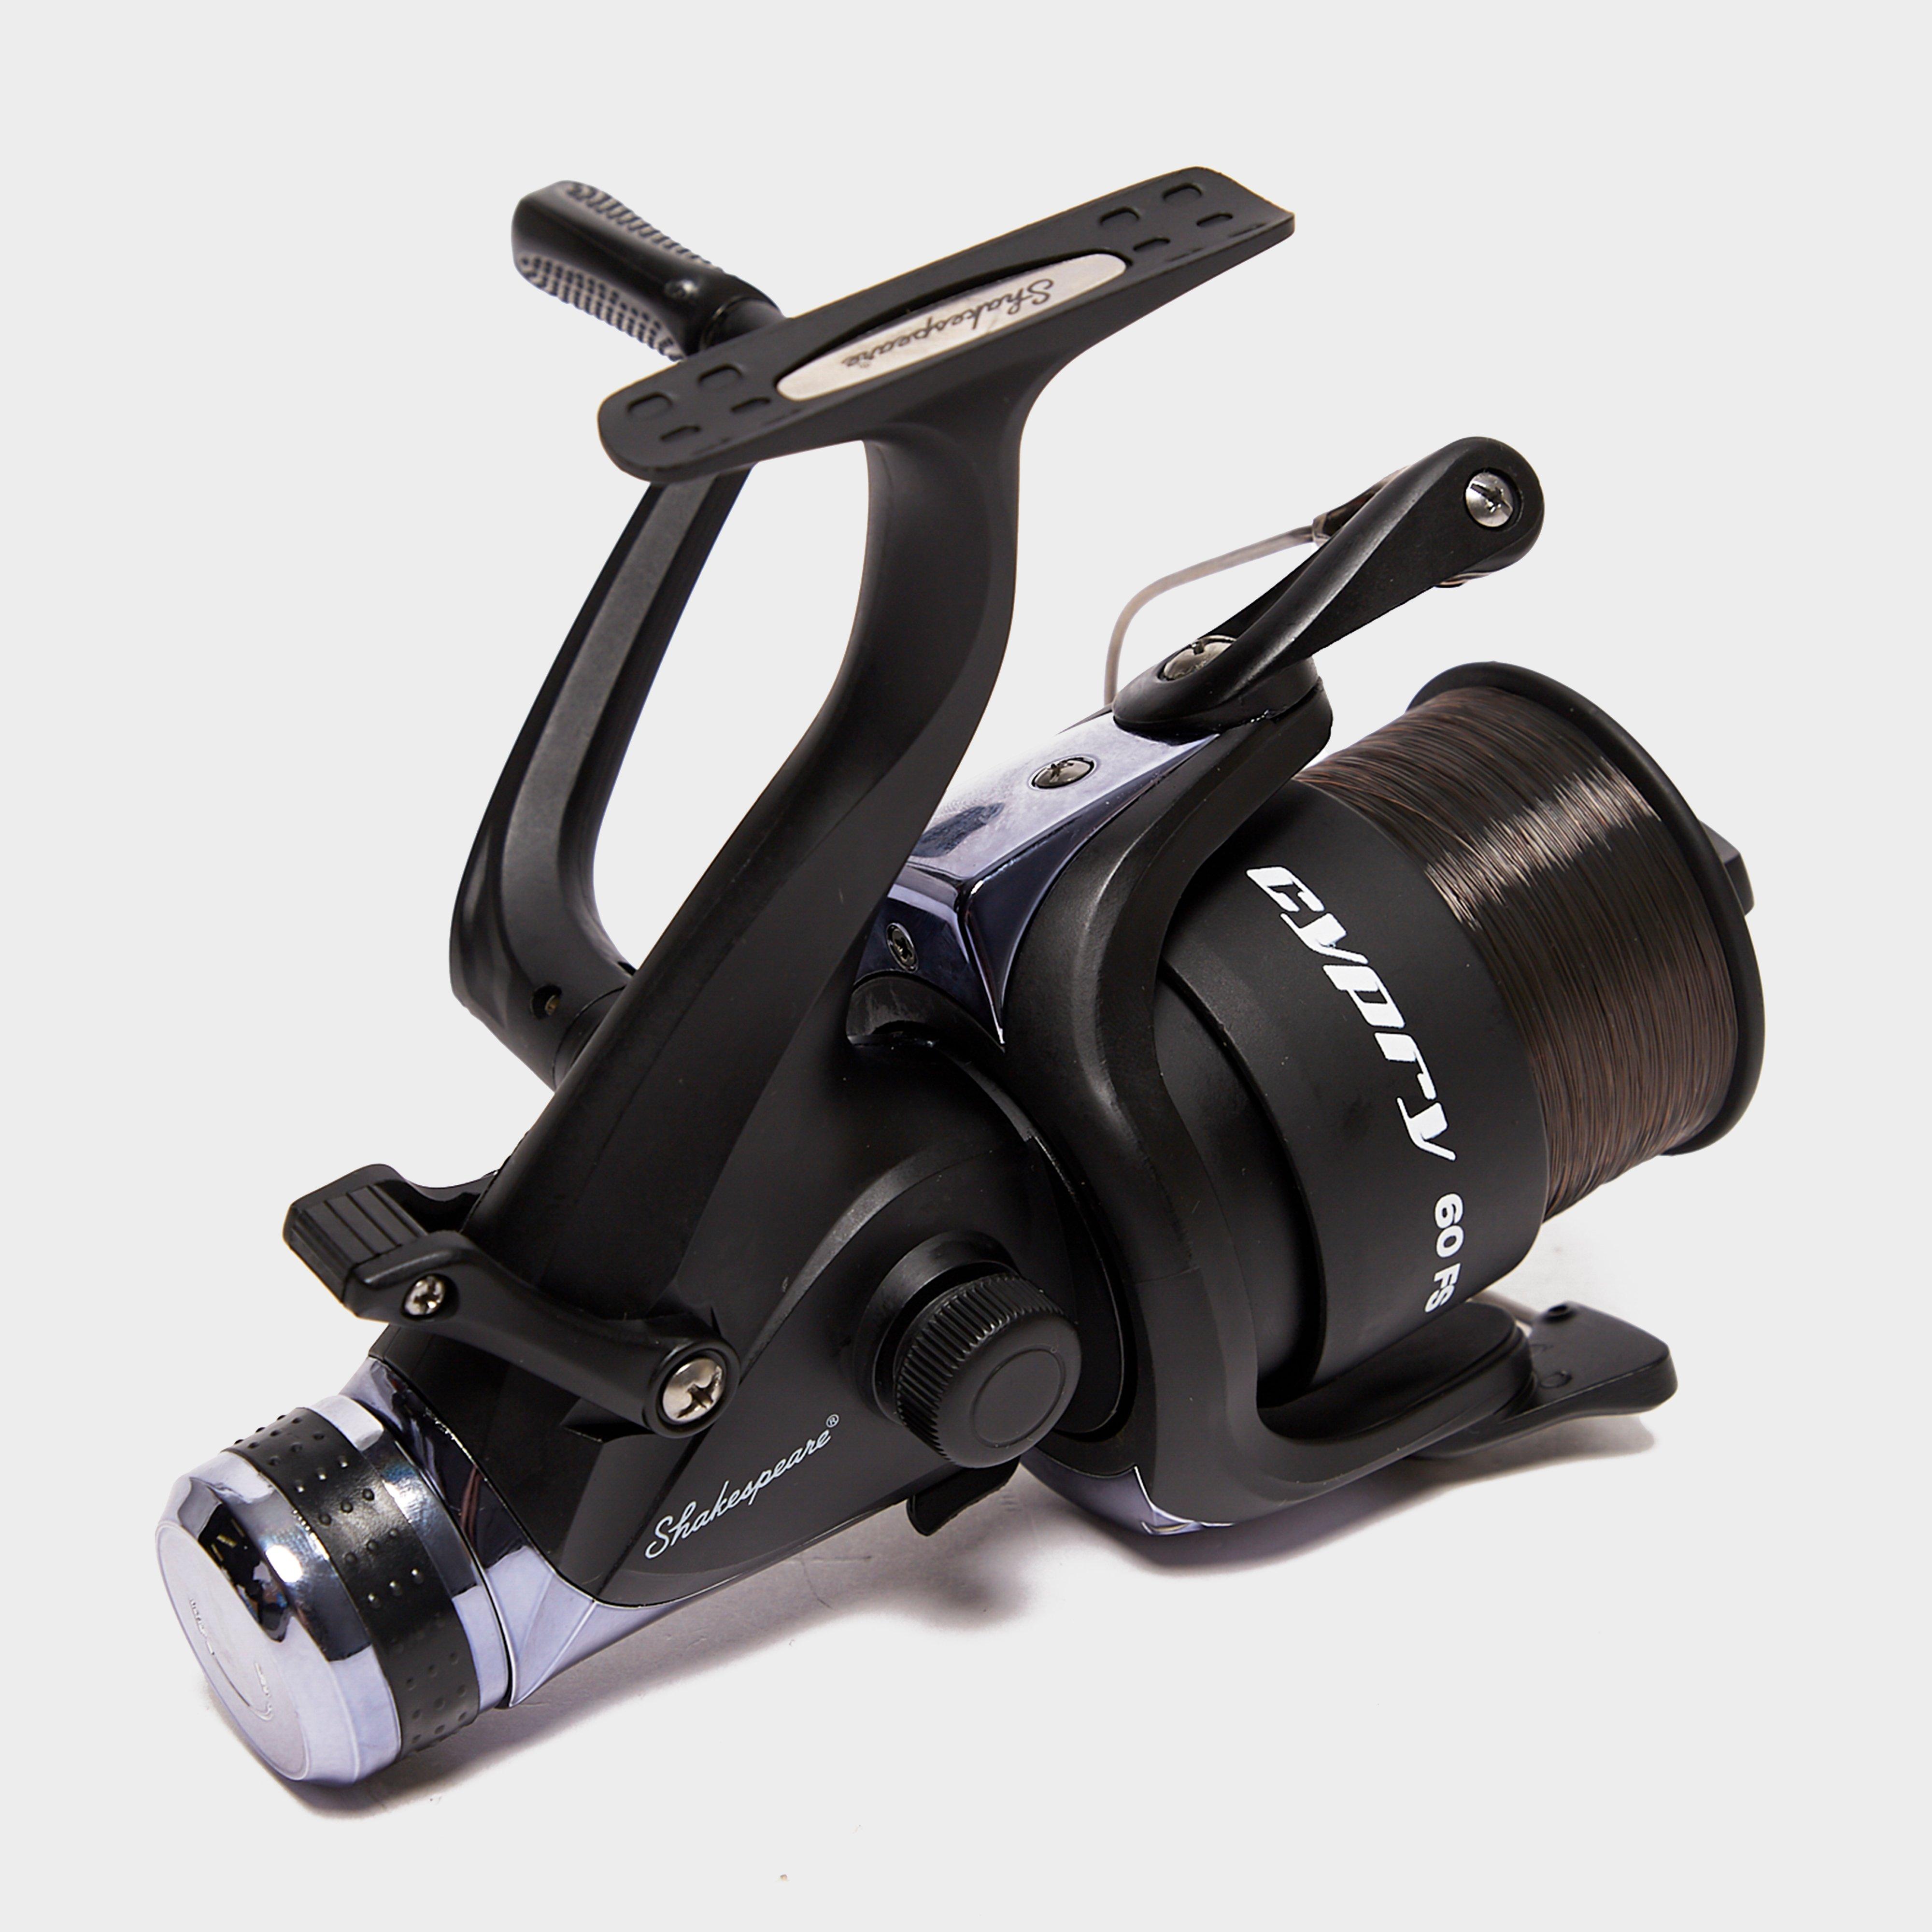 Shakespeare Cypry 60 FS Spinning Reel Review